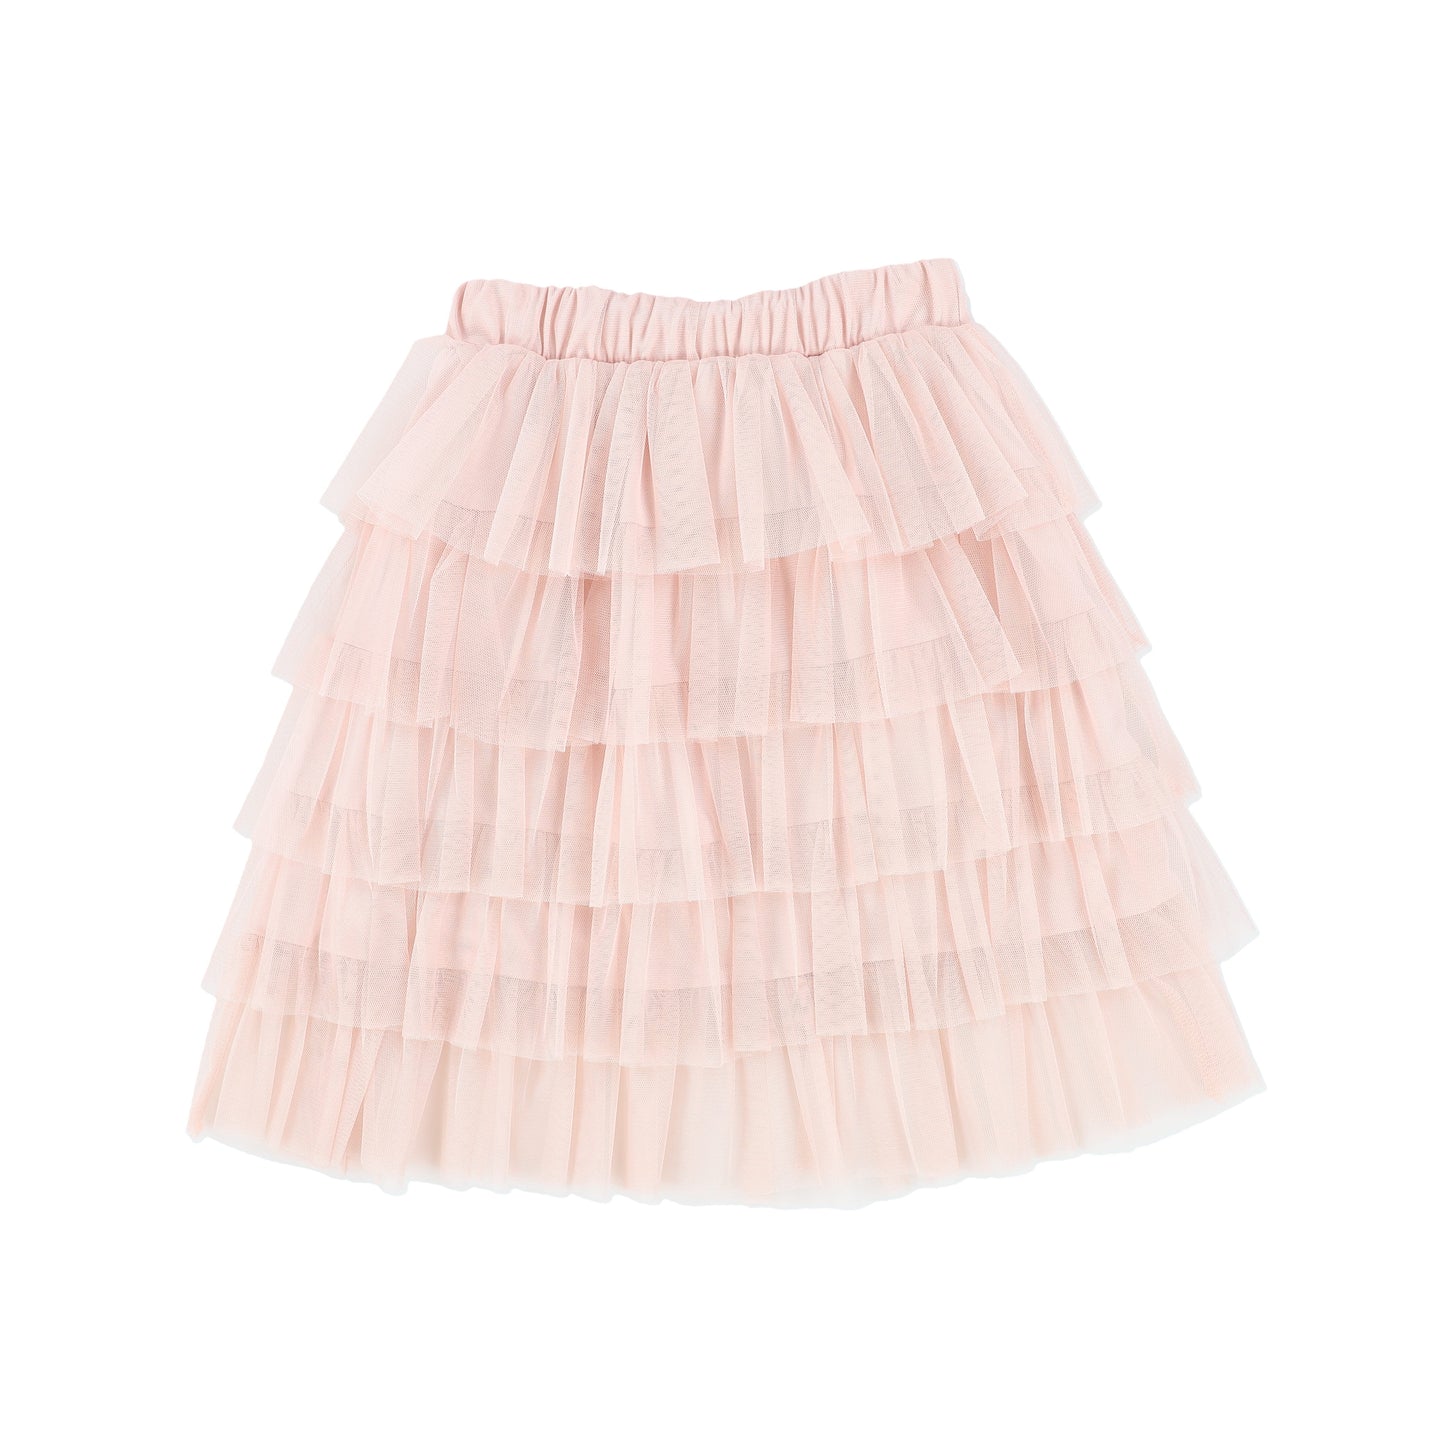 IMPERIAL LIGHT PINK TULLE RUFFLE SKIRT [Final Sale]